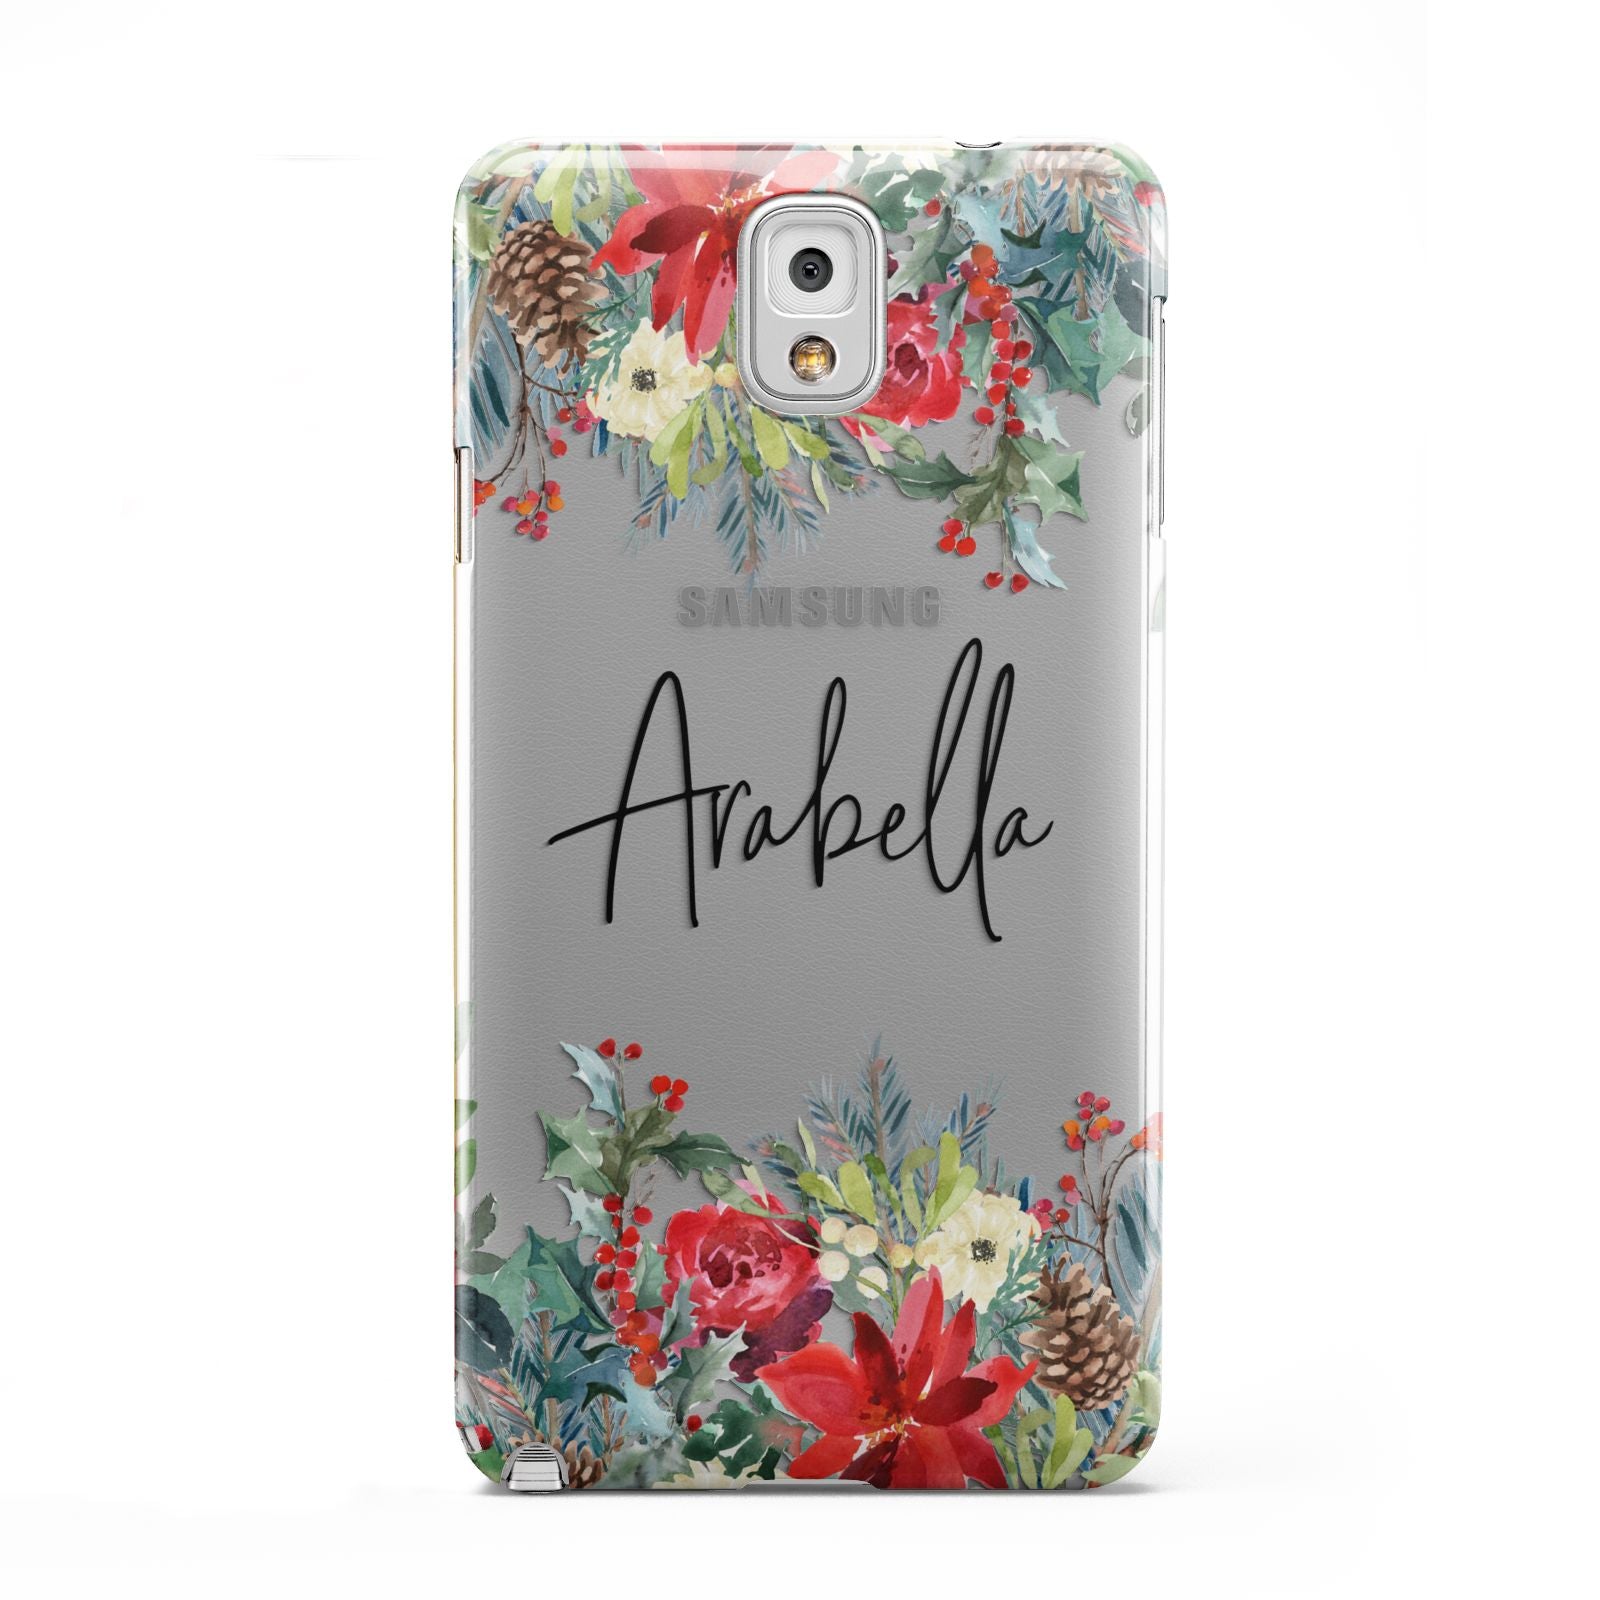 Personalised Floral Winter Arrangement Samsung Galaxy Note 3 Case